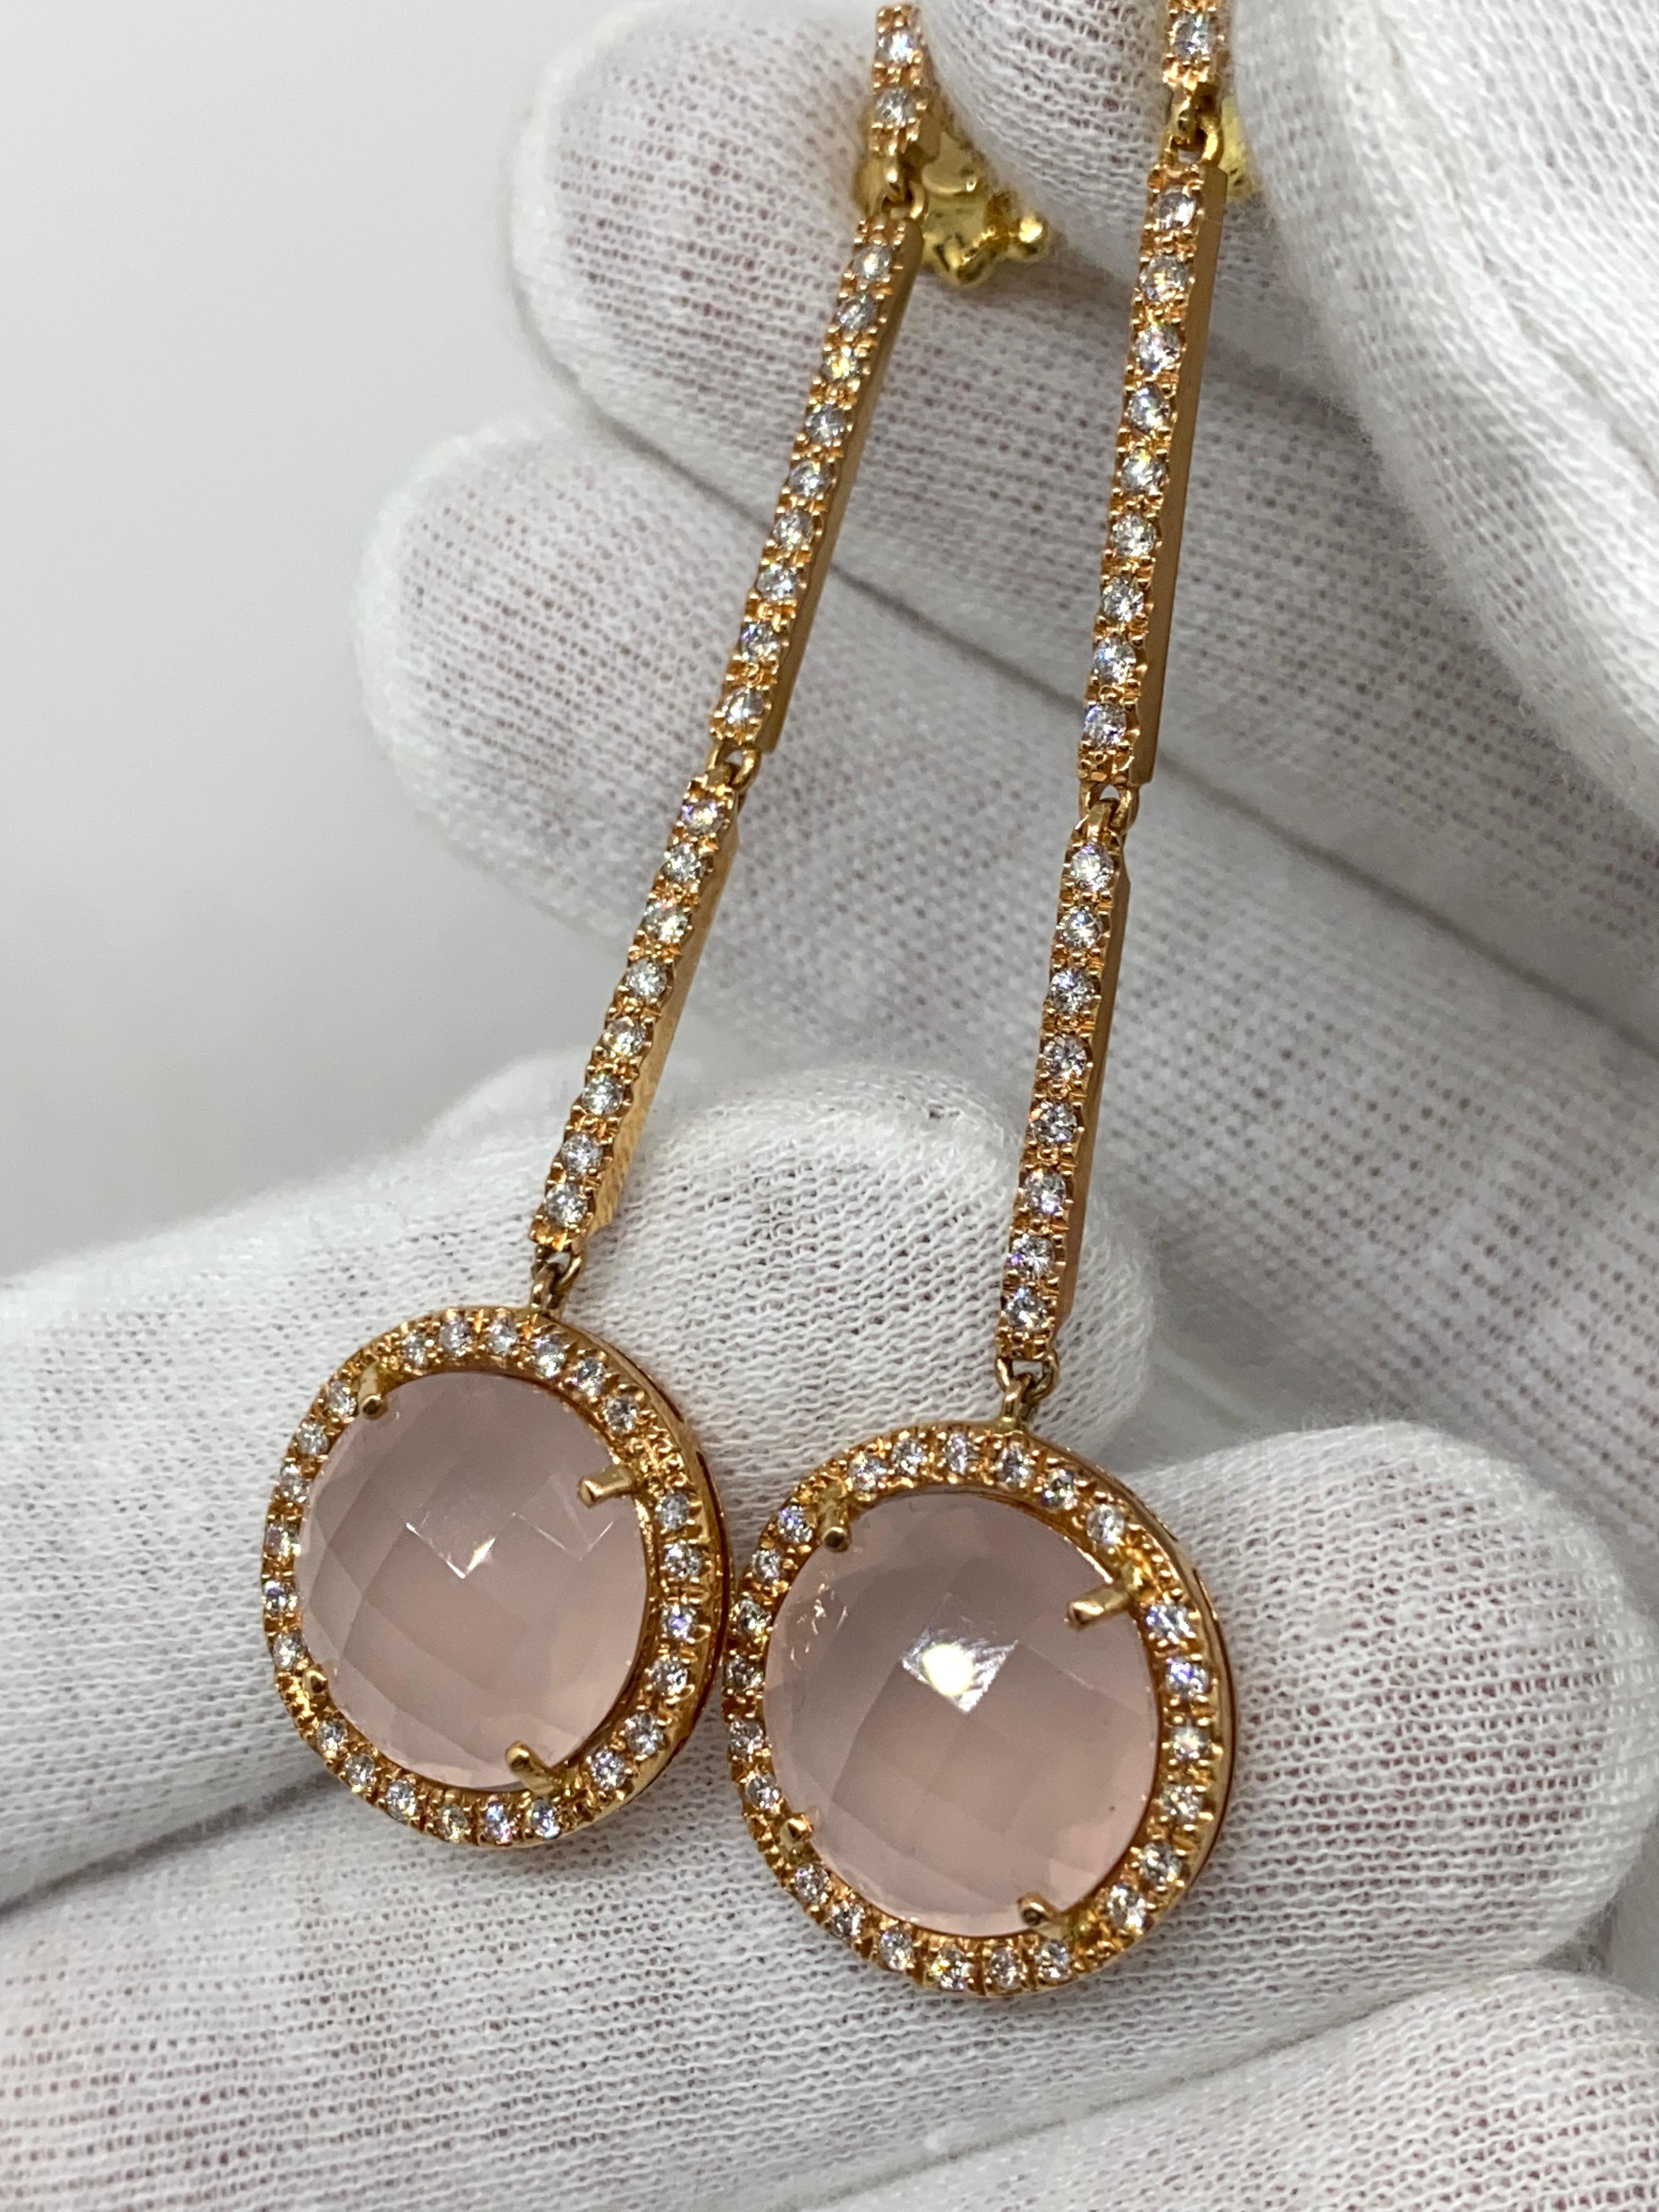 Dangling earrings made of 18 kt rose gold with natural brilliant-cut diamonds for ct.1.72 and faceted rose quartz

Welcome to our jewelry collection, where every piece tells a story of timeless elegance and unparalleled craftsmanship. As a